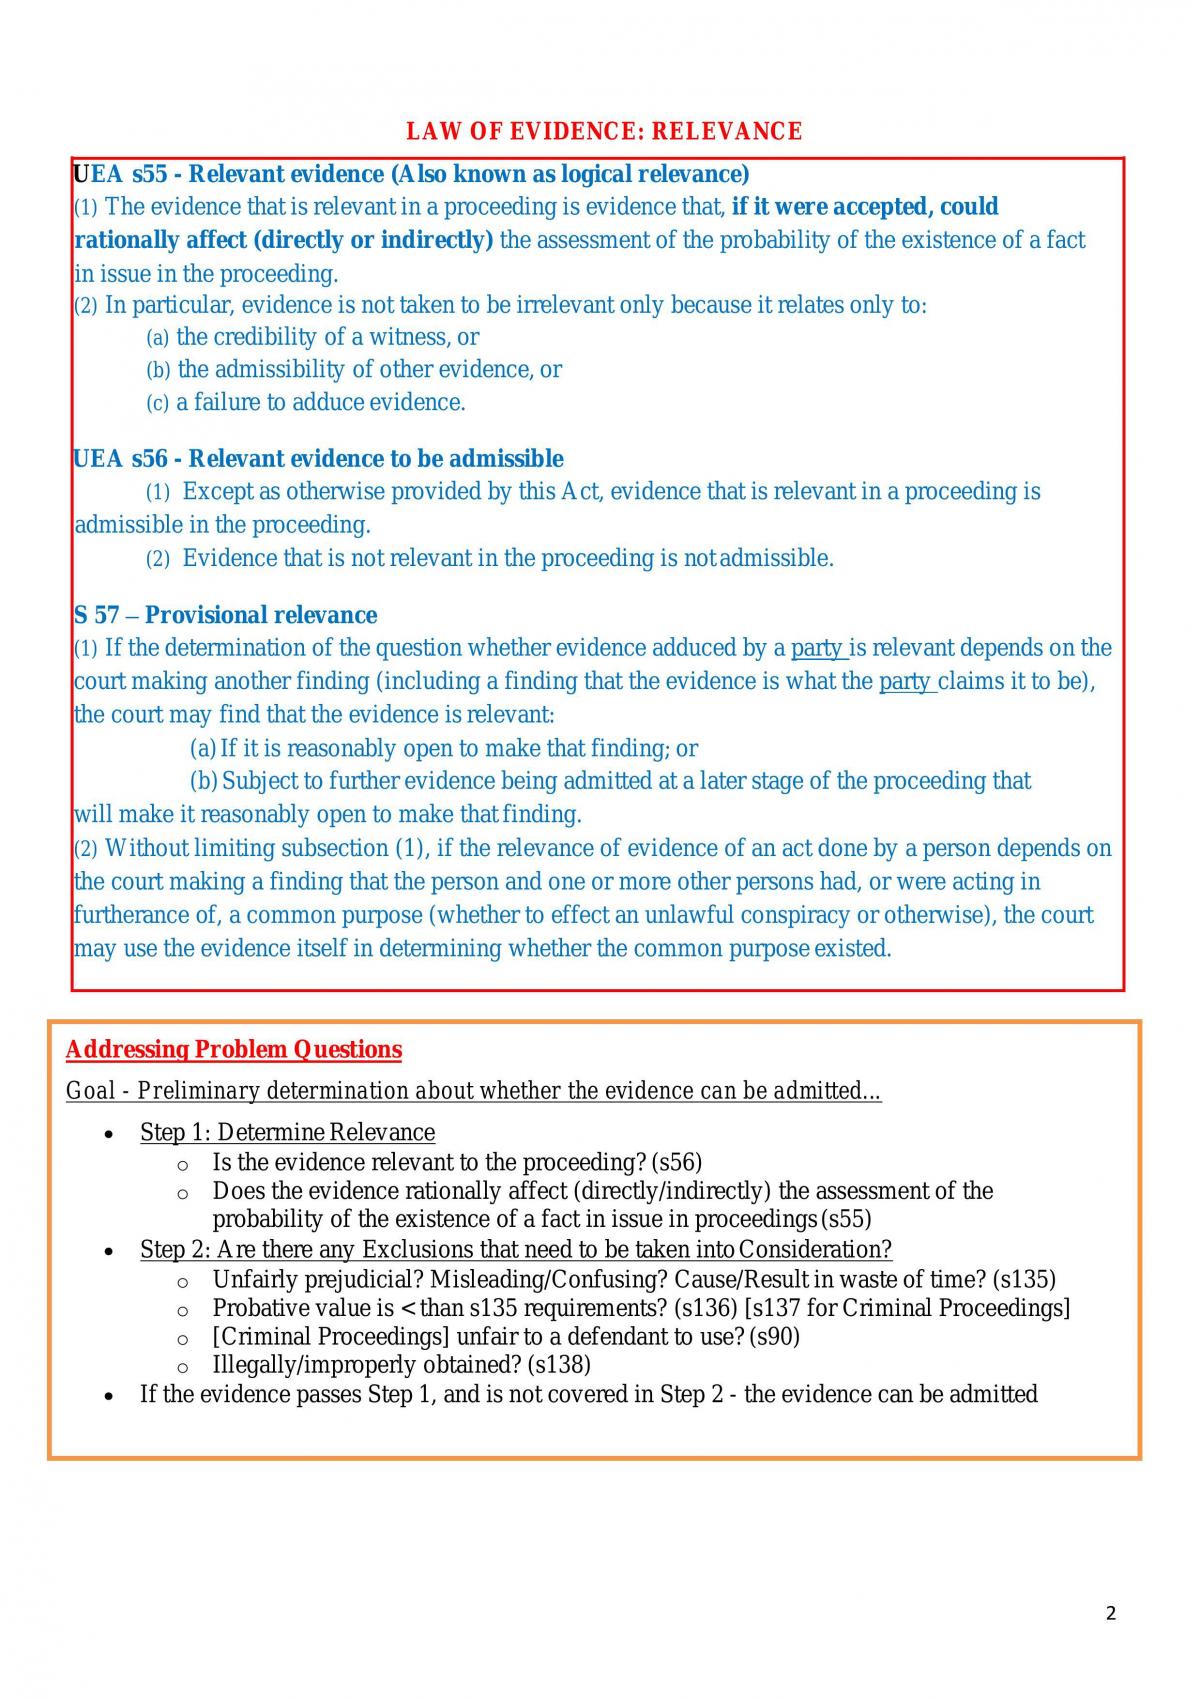 JURD7251 CPEP Final Exam Notes - Page 2